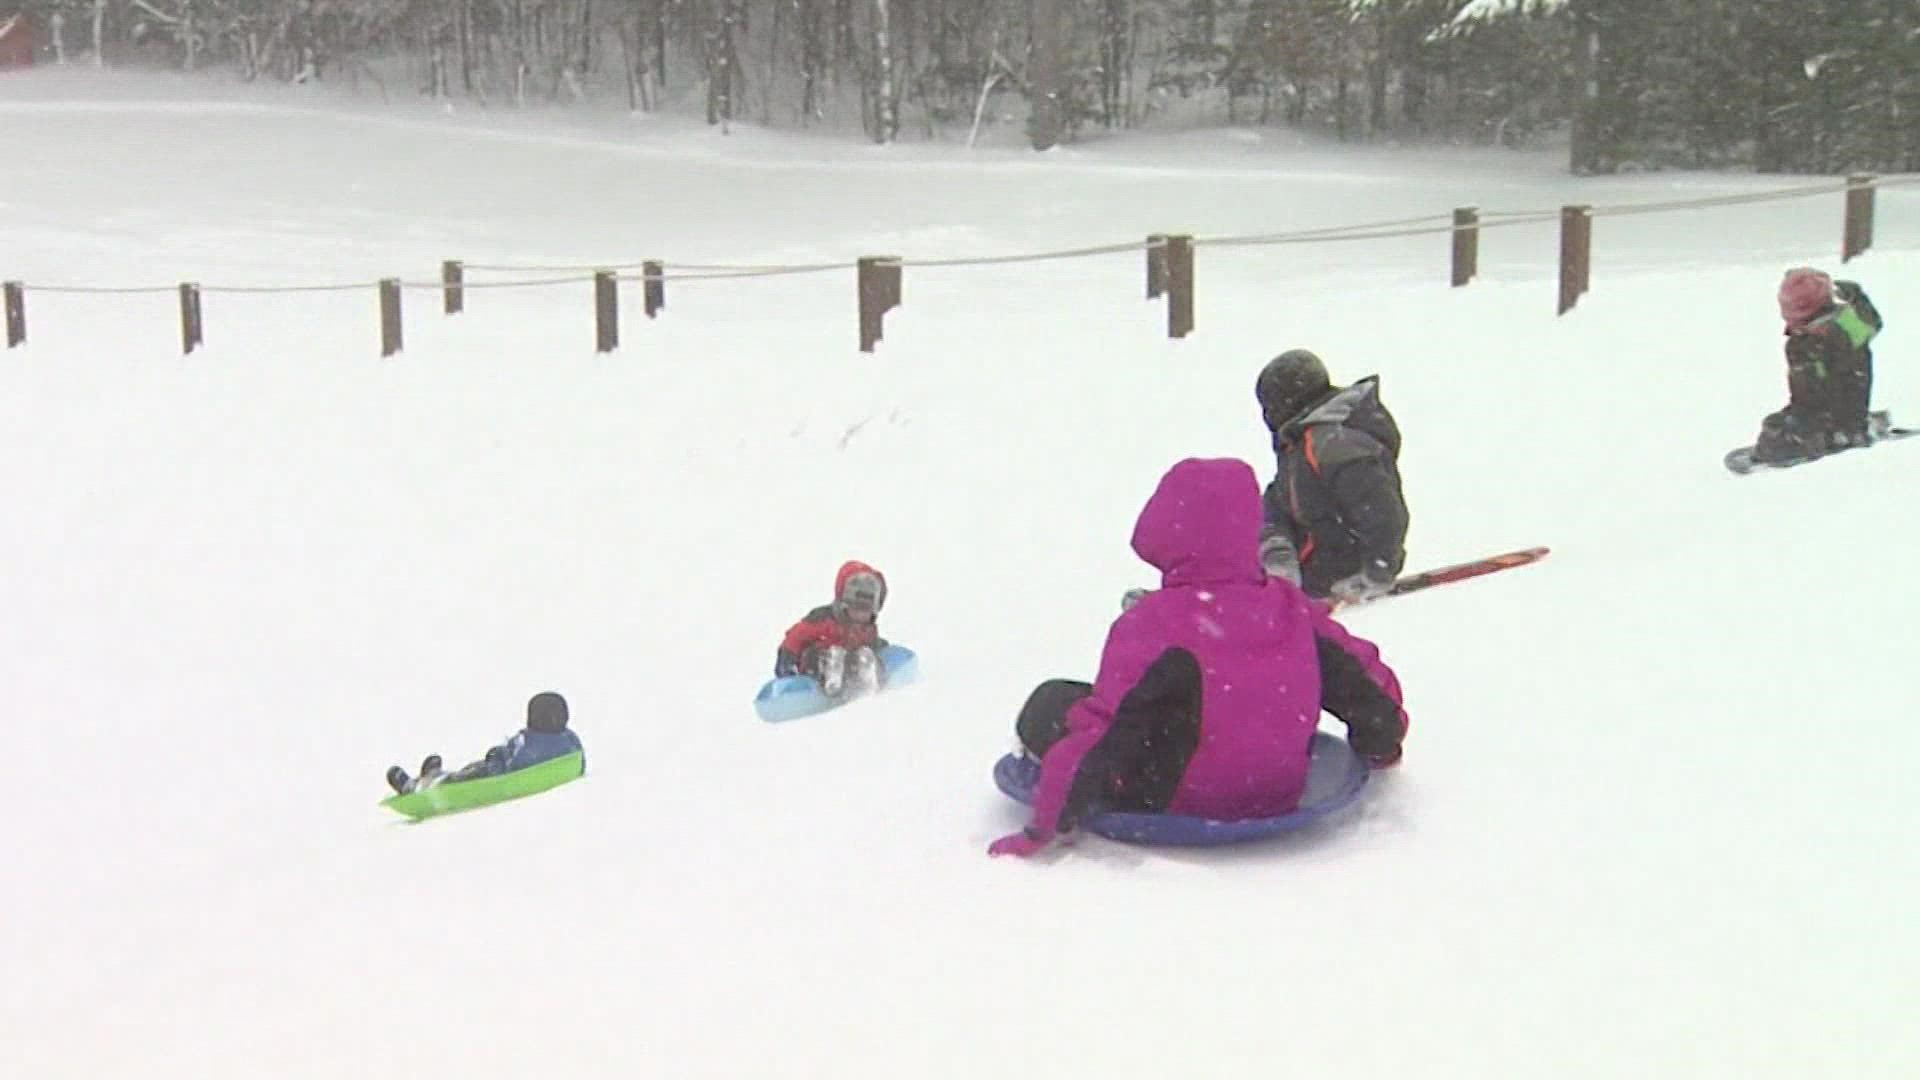 To ski or not to ski New camera shows 24/7 live feed of popular sledding hill and cross-country ski tracks wzzm13